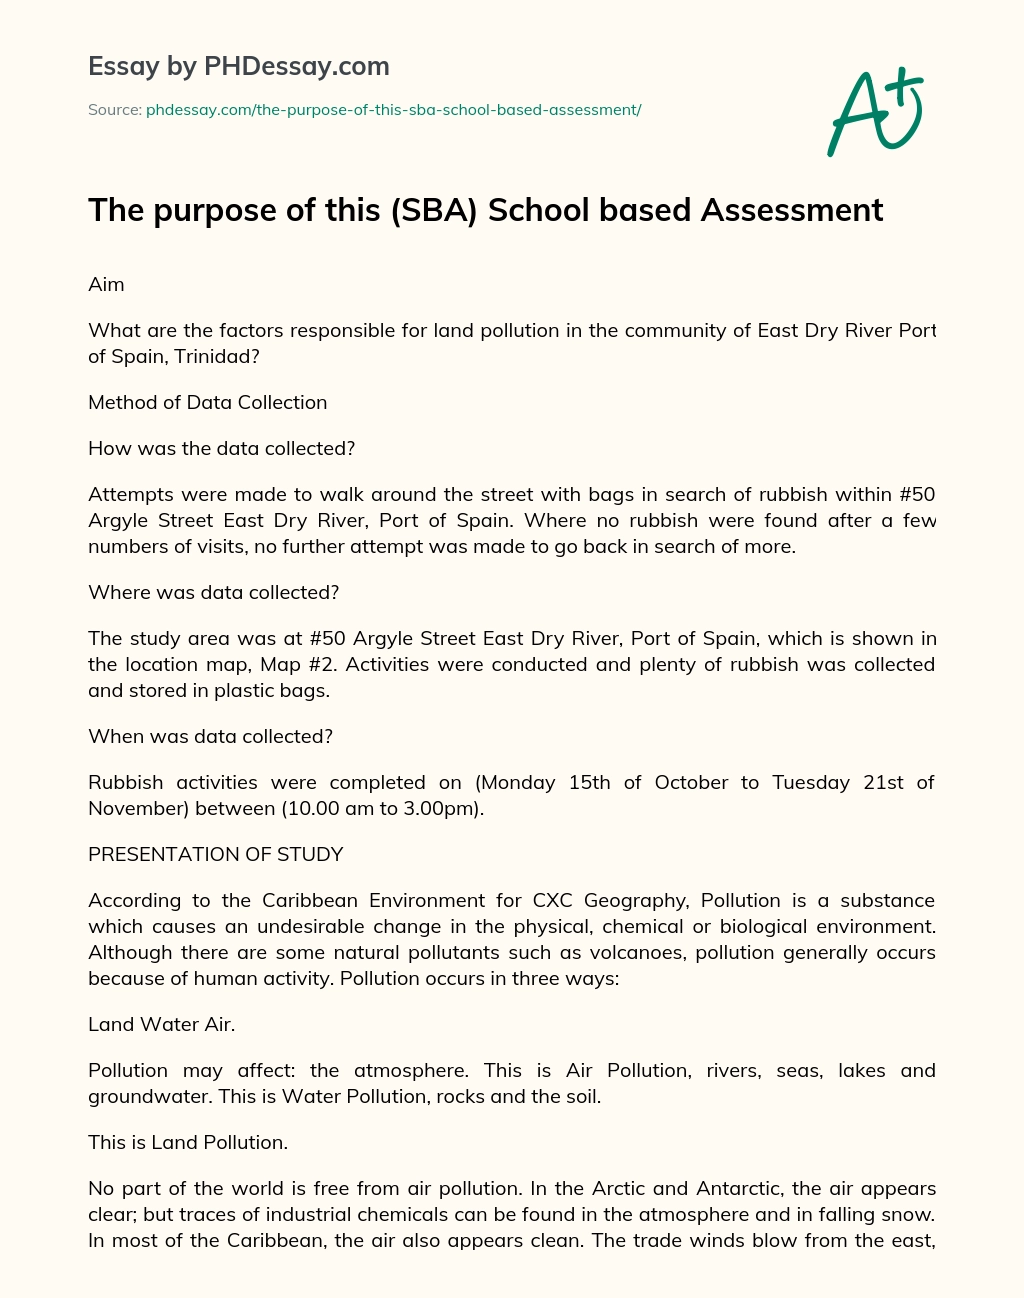 The purpose of this (SBA) School based Assessment essay